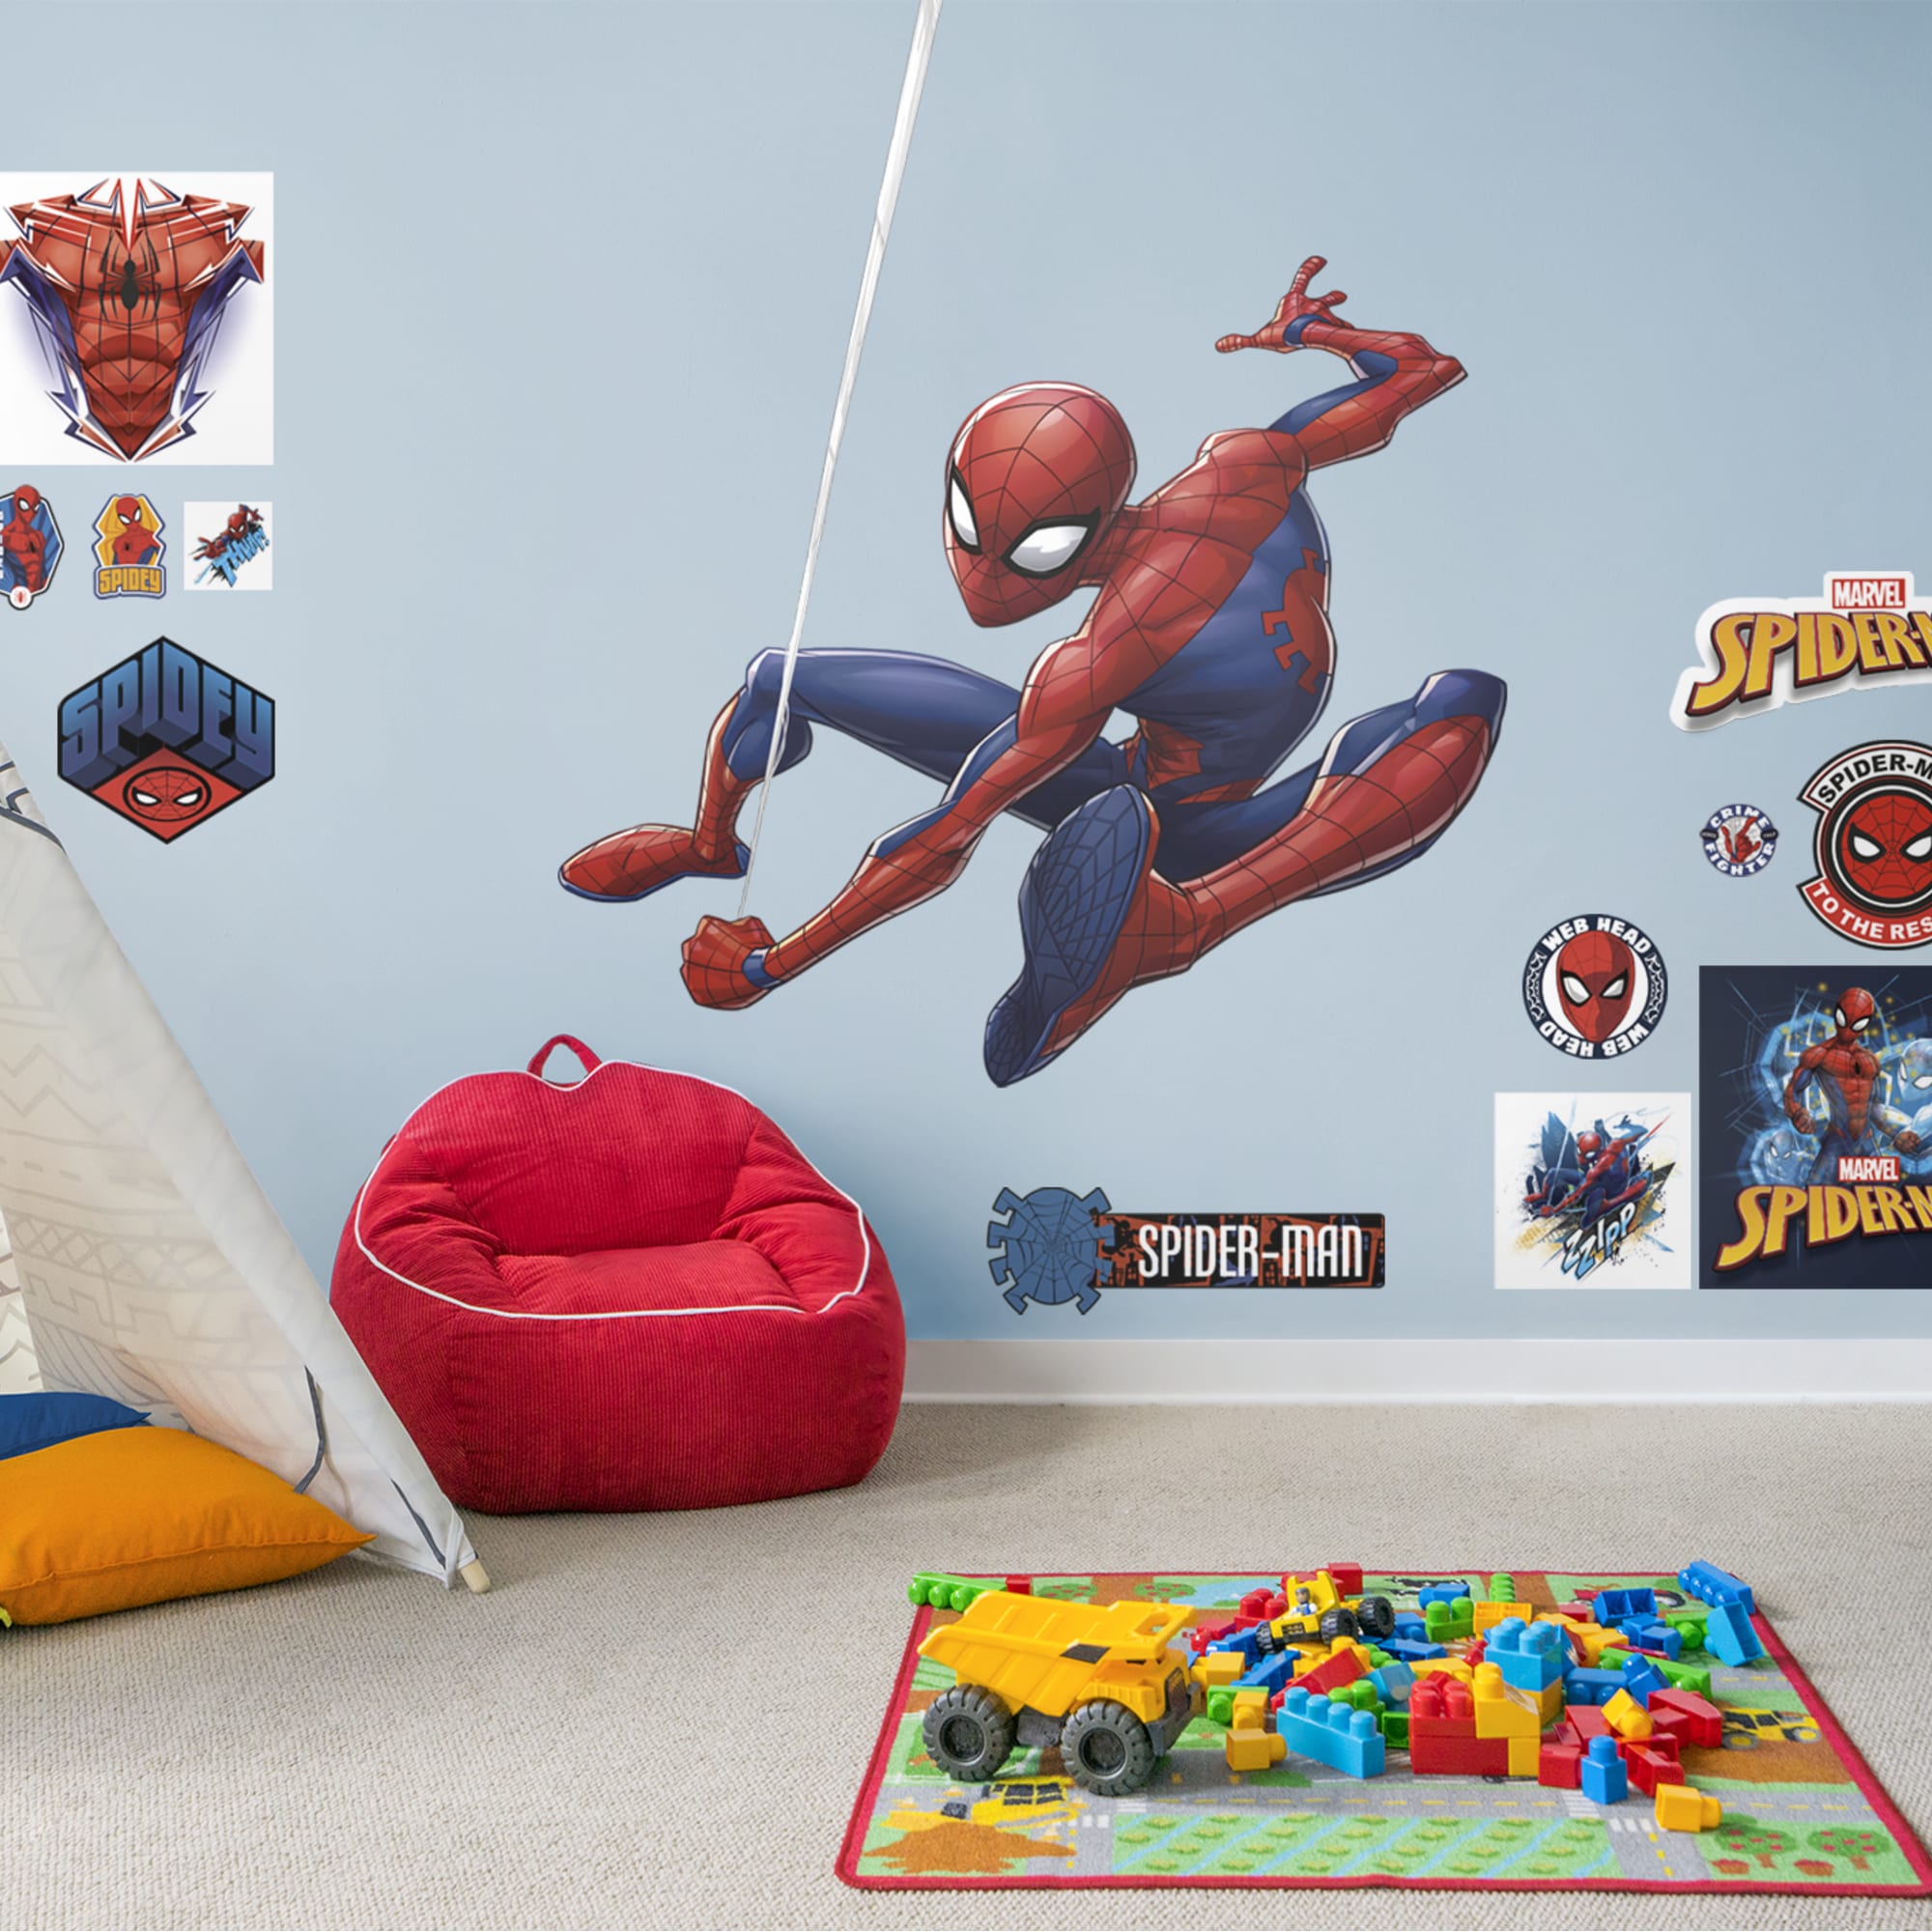 Spider-Man: Swing - Officially Licensed Removable Wall Decal Life-Size Character + 9 Decals (53"W x 103"H) by Fathead | Vinyl